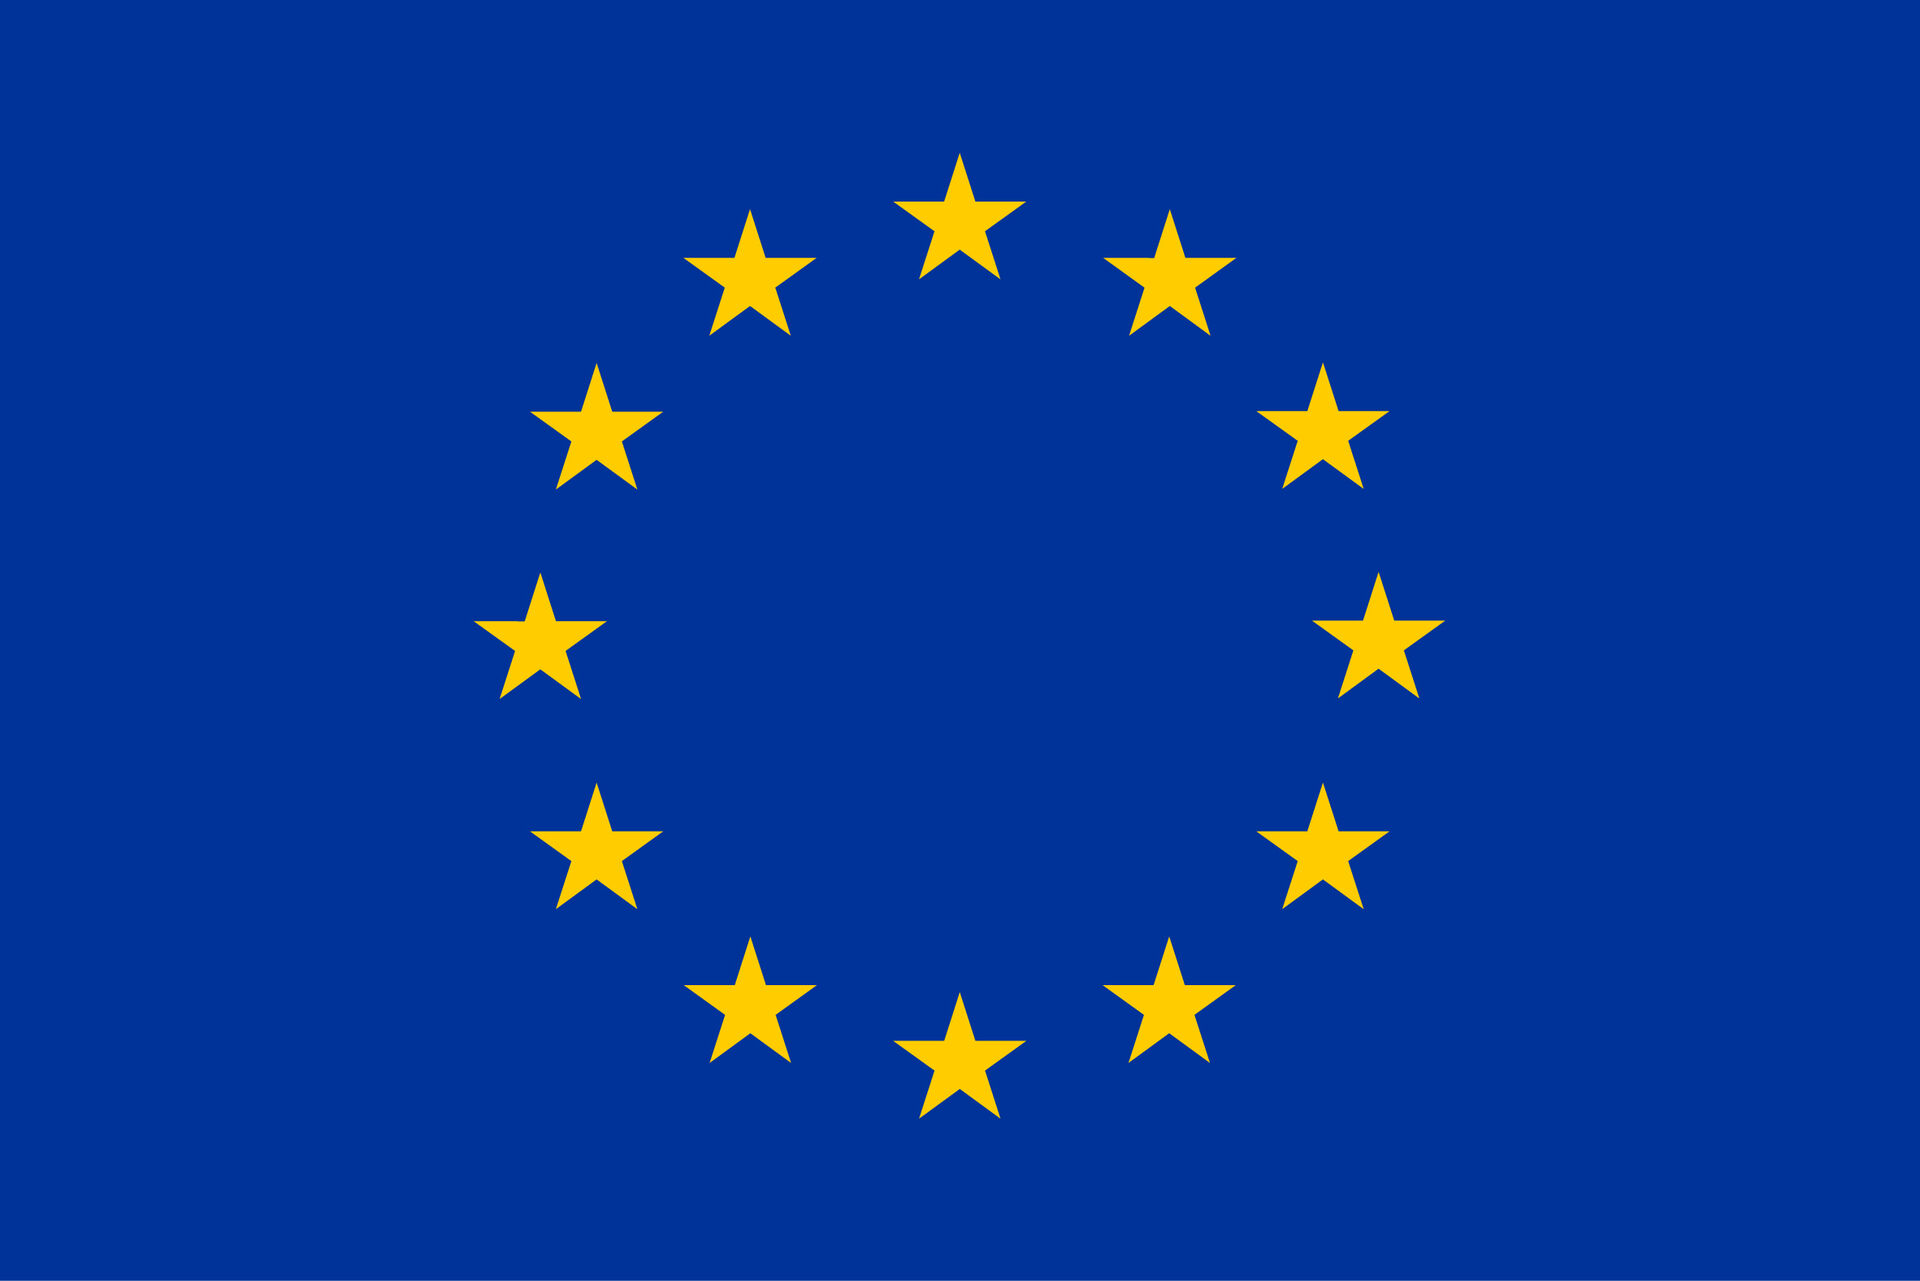 EU-flag. Stars in a circle on a blue background.